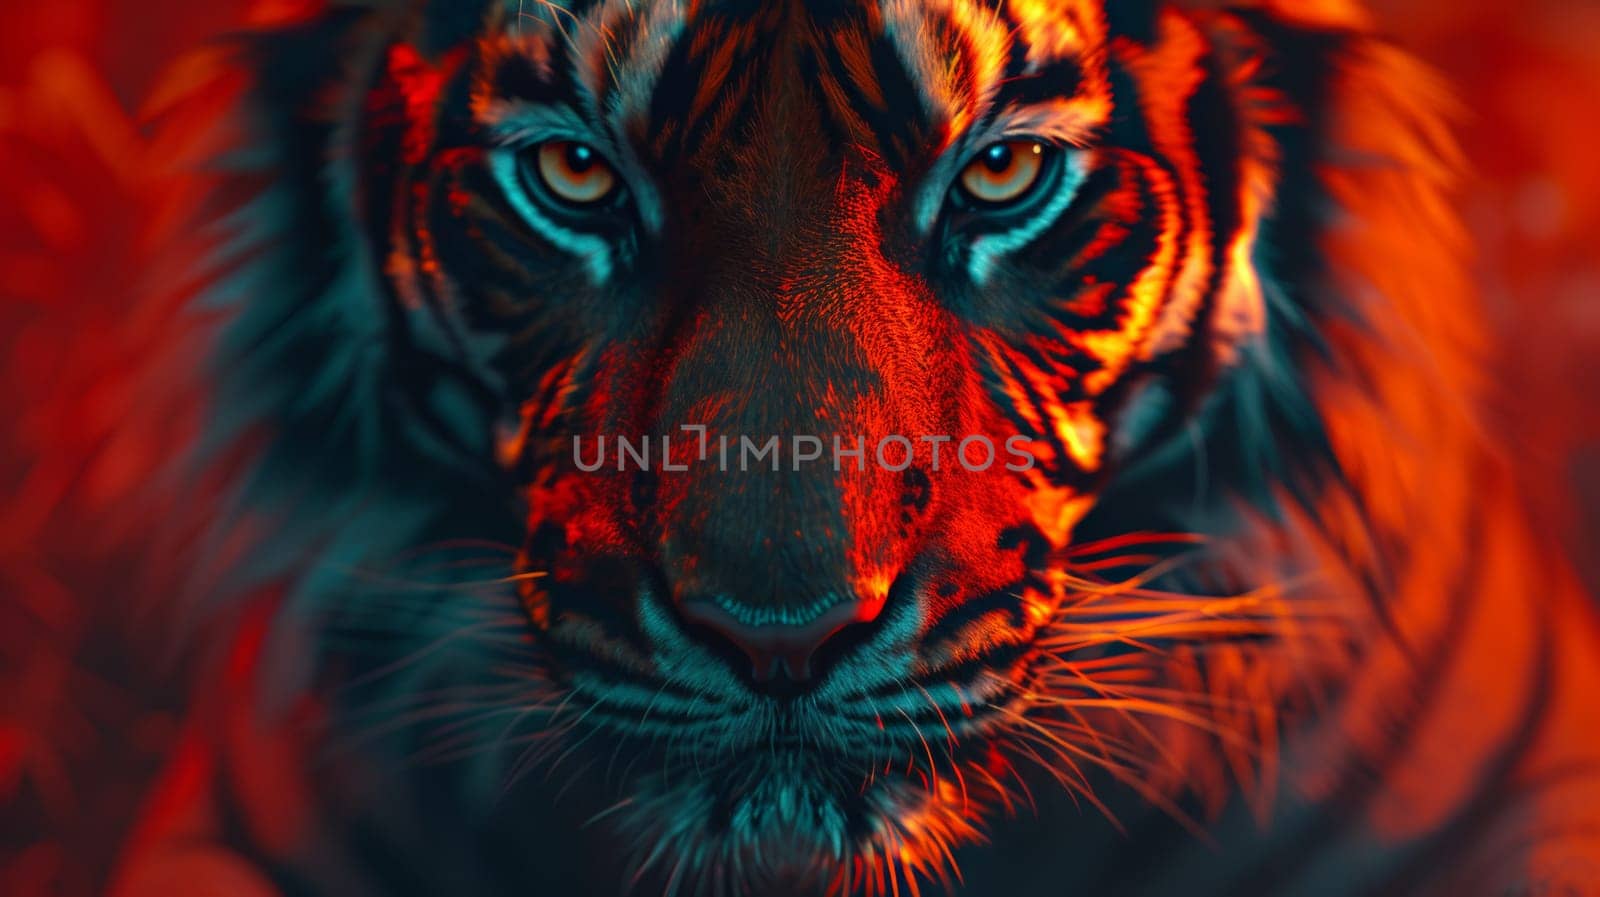 A close up of a tiger's face with red and blue lighting